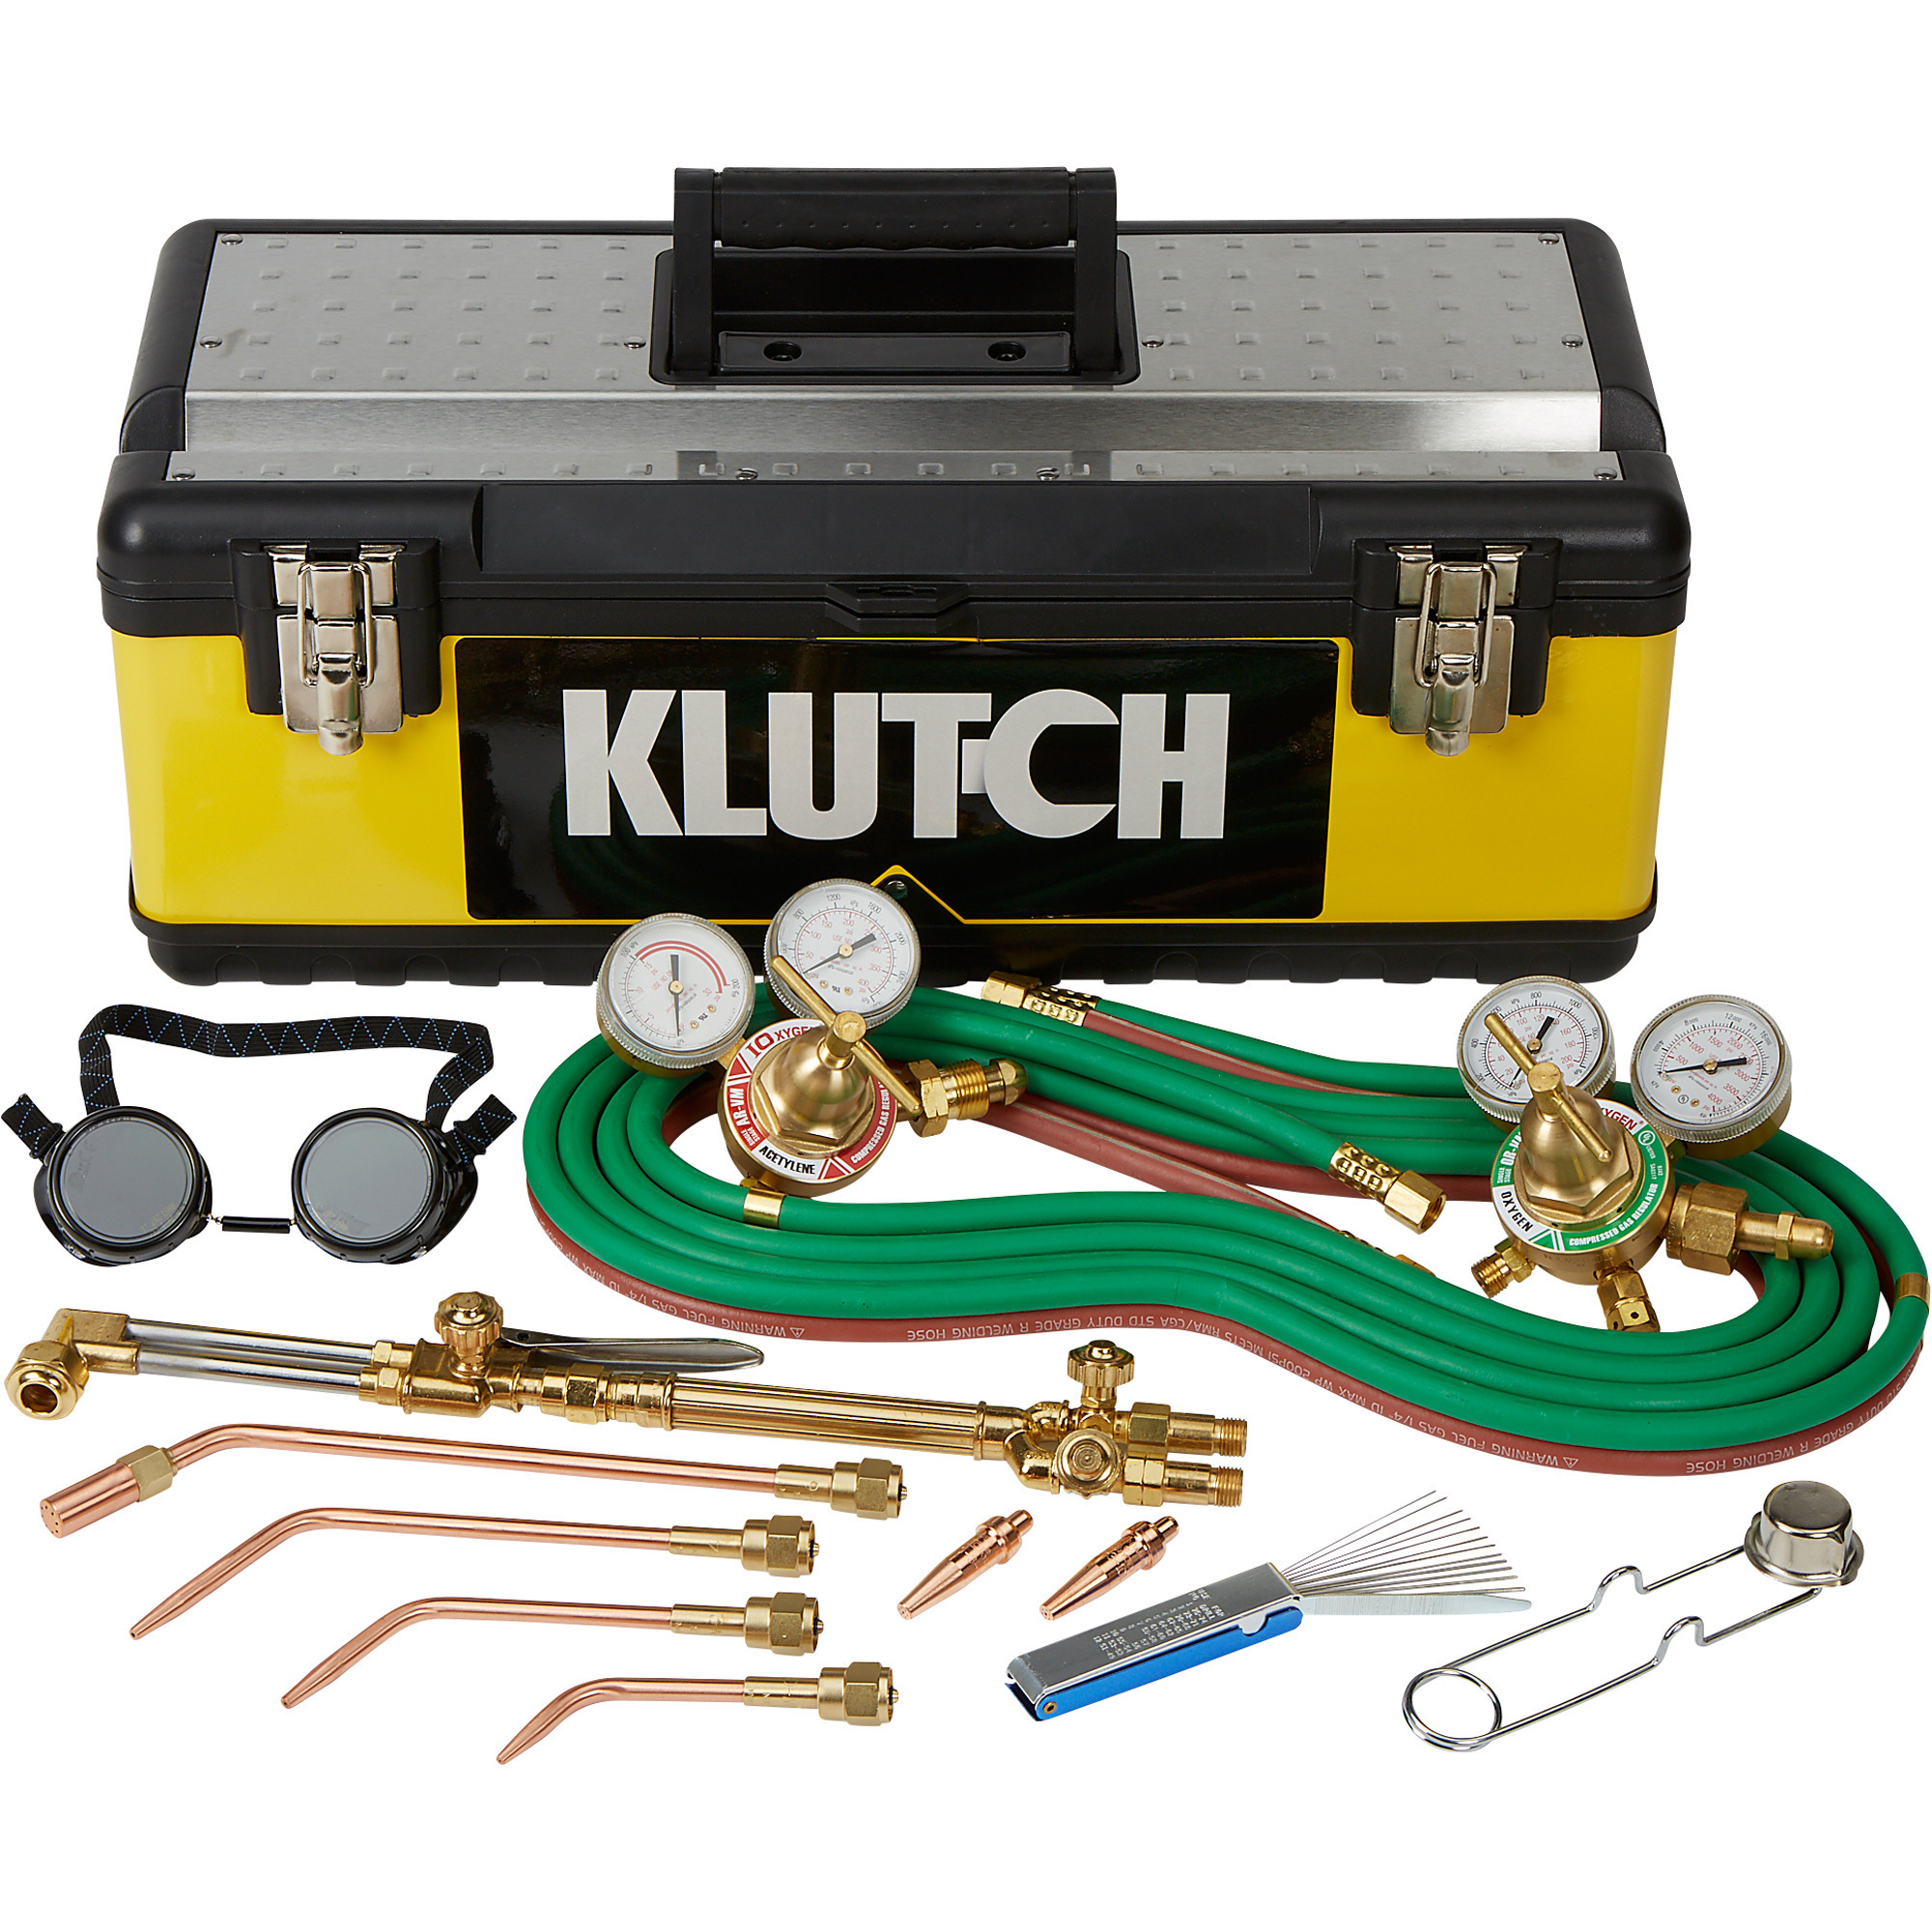 Klutch Medium-Duty Cutting and Welding Outfit with Toolbox â Oxyacetylene Victor-Style, 11-Piece Set